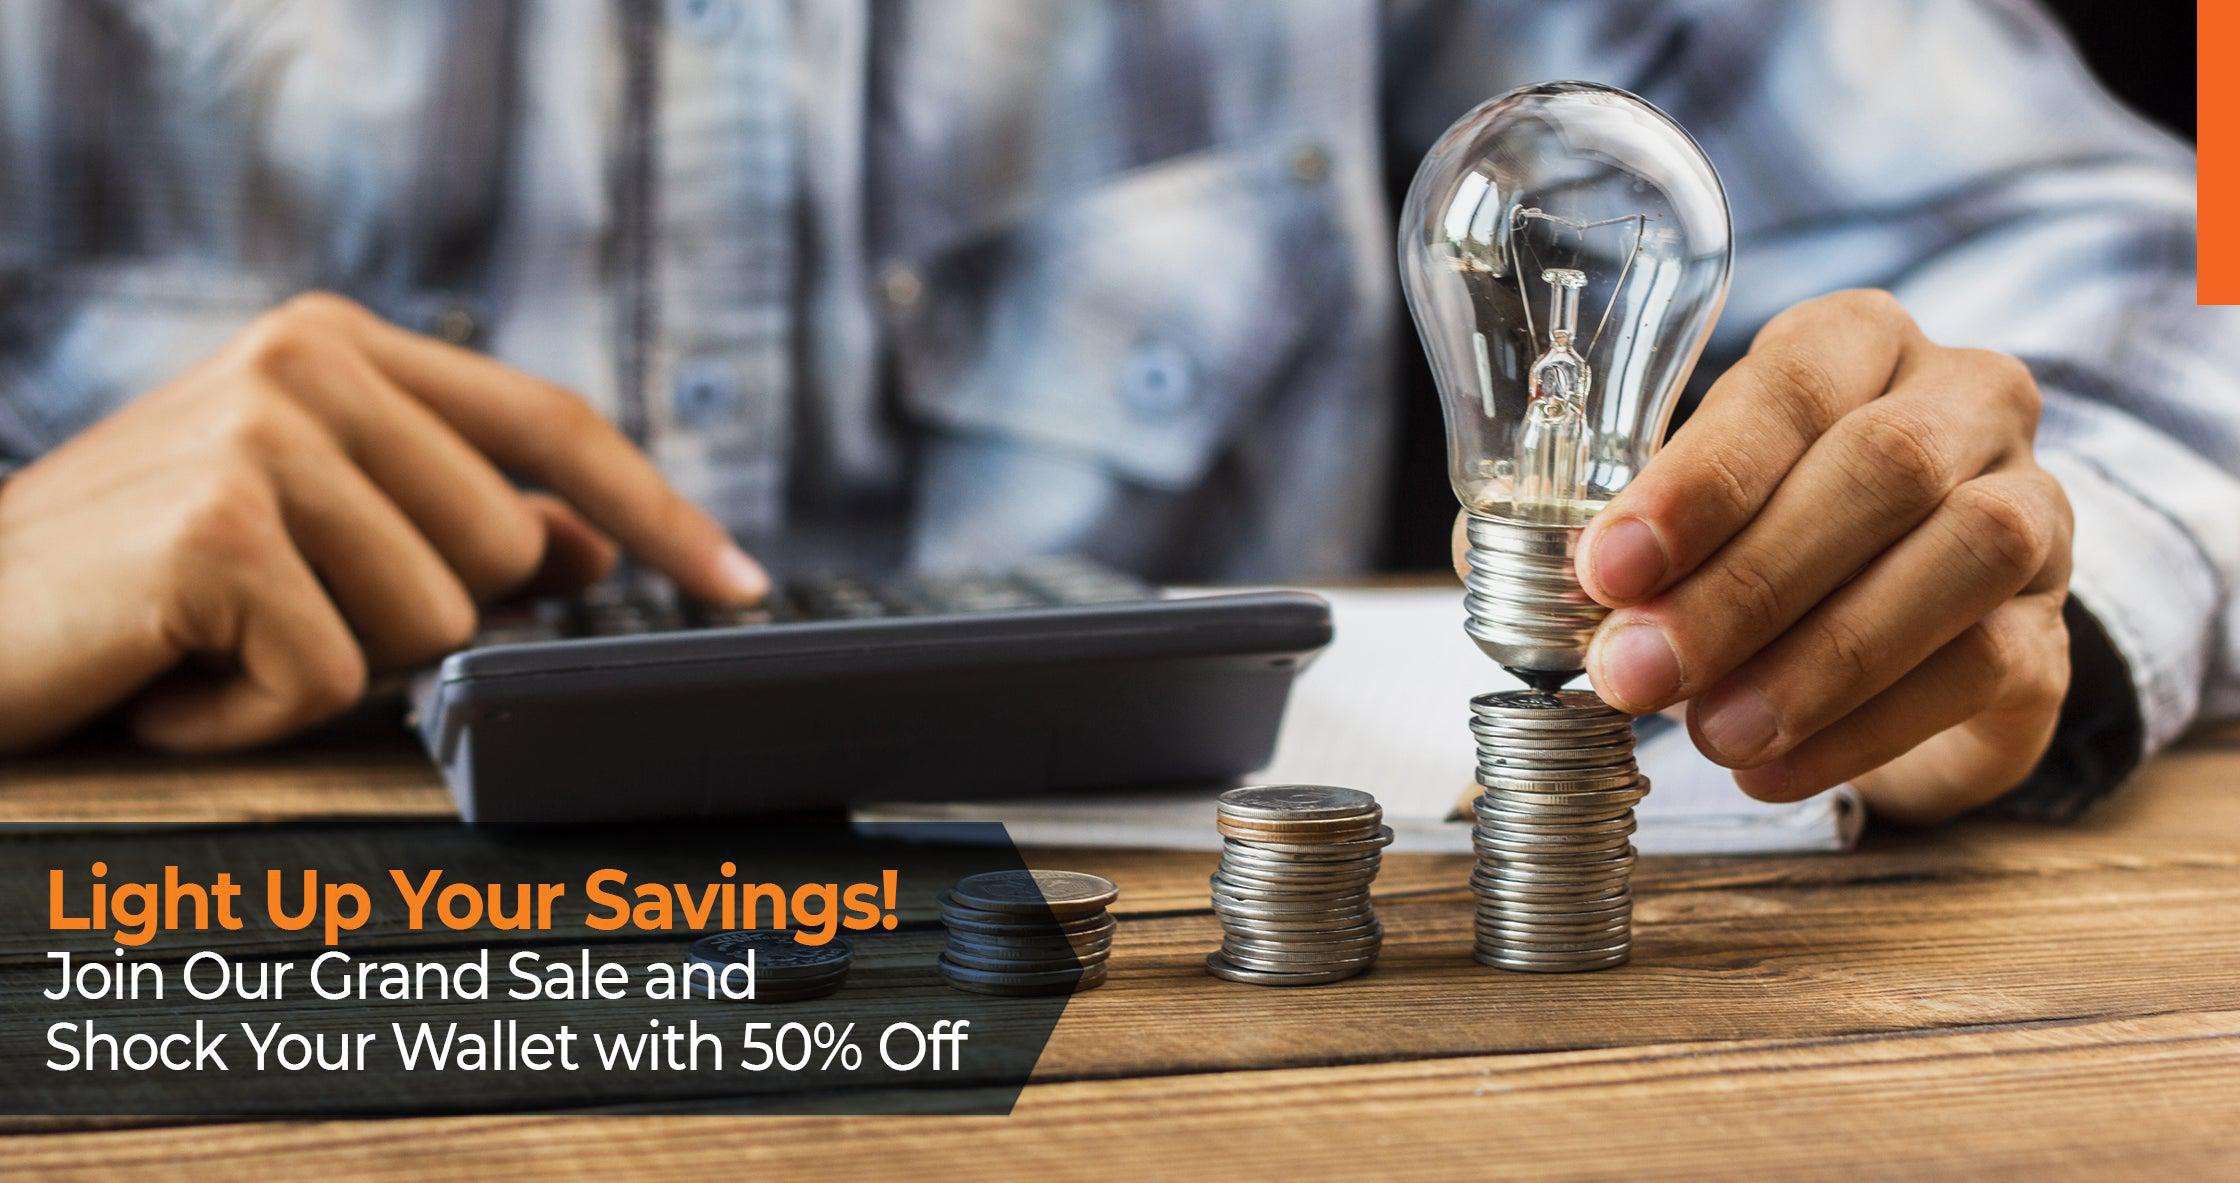 Light Up Your Savings! Join Our Grand Sale and Shock Your Wallet with 50% Off!